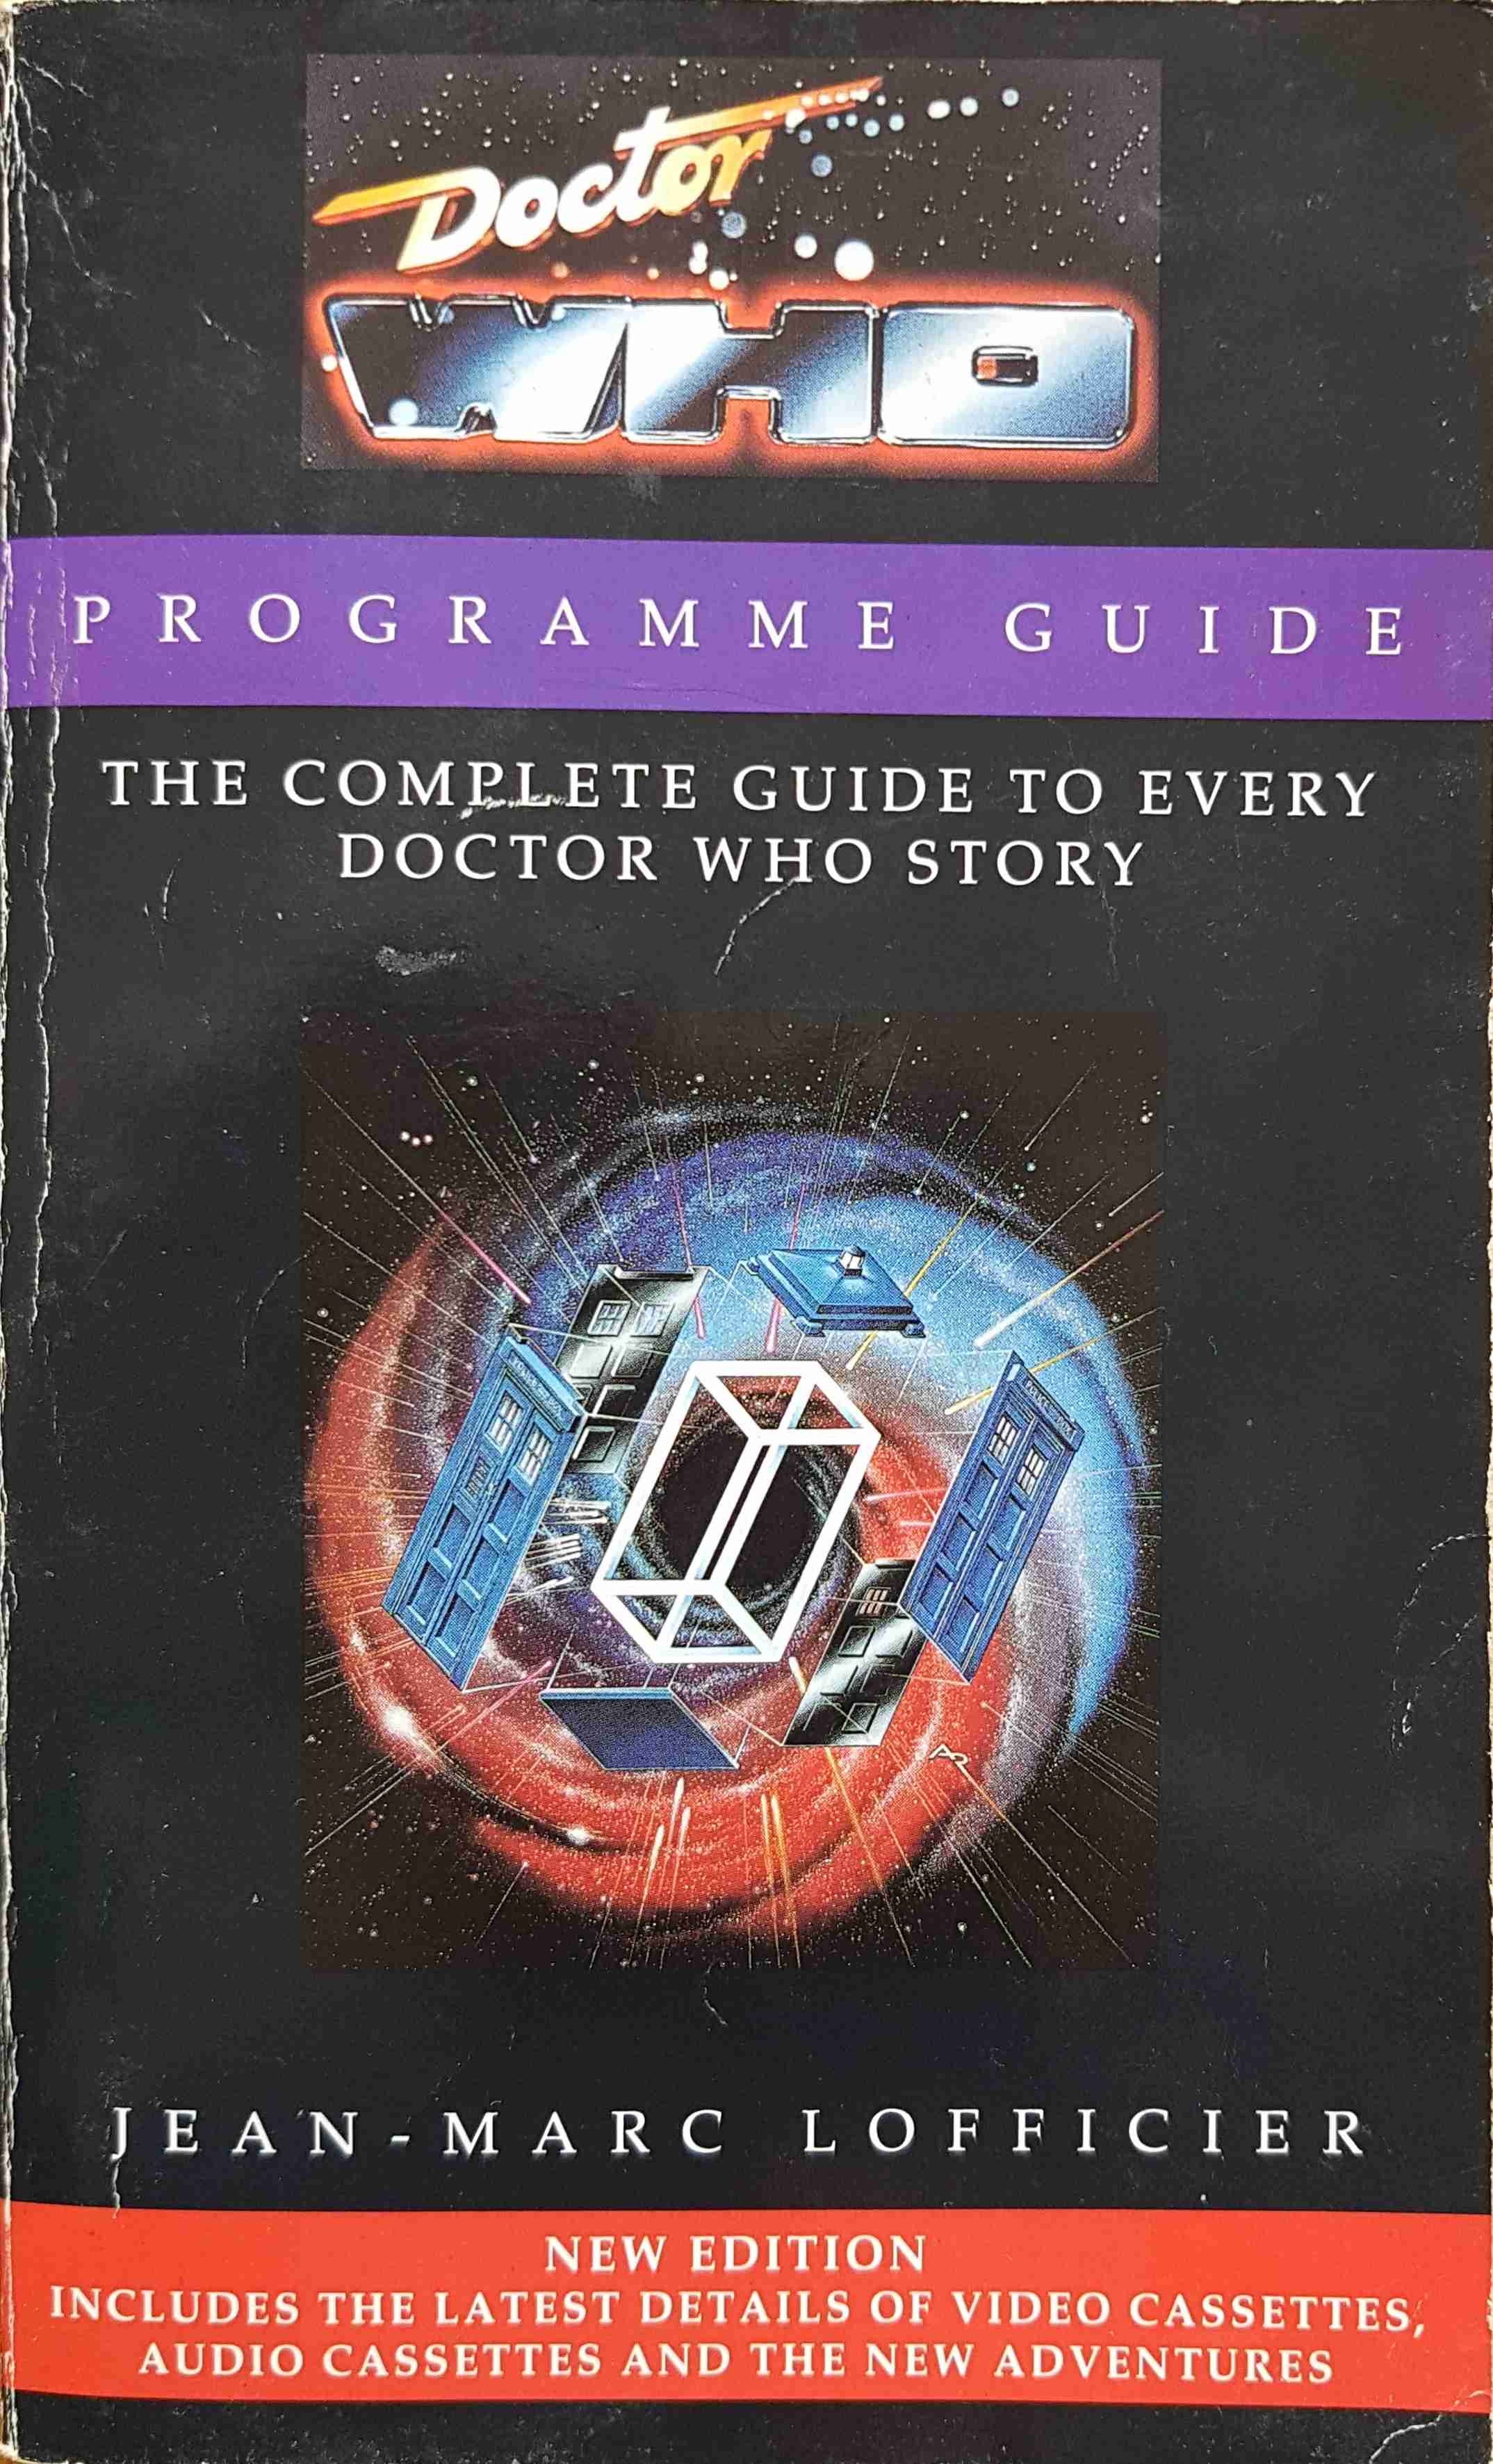 Picture of 0-426-20342-9R Doctor Who - Programme guide - New edition by artist Jean-Marc Lofficier from the BBC records and Tapes library